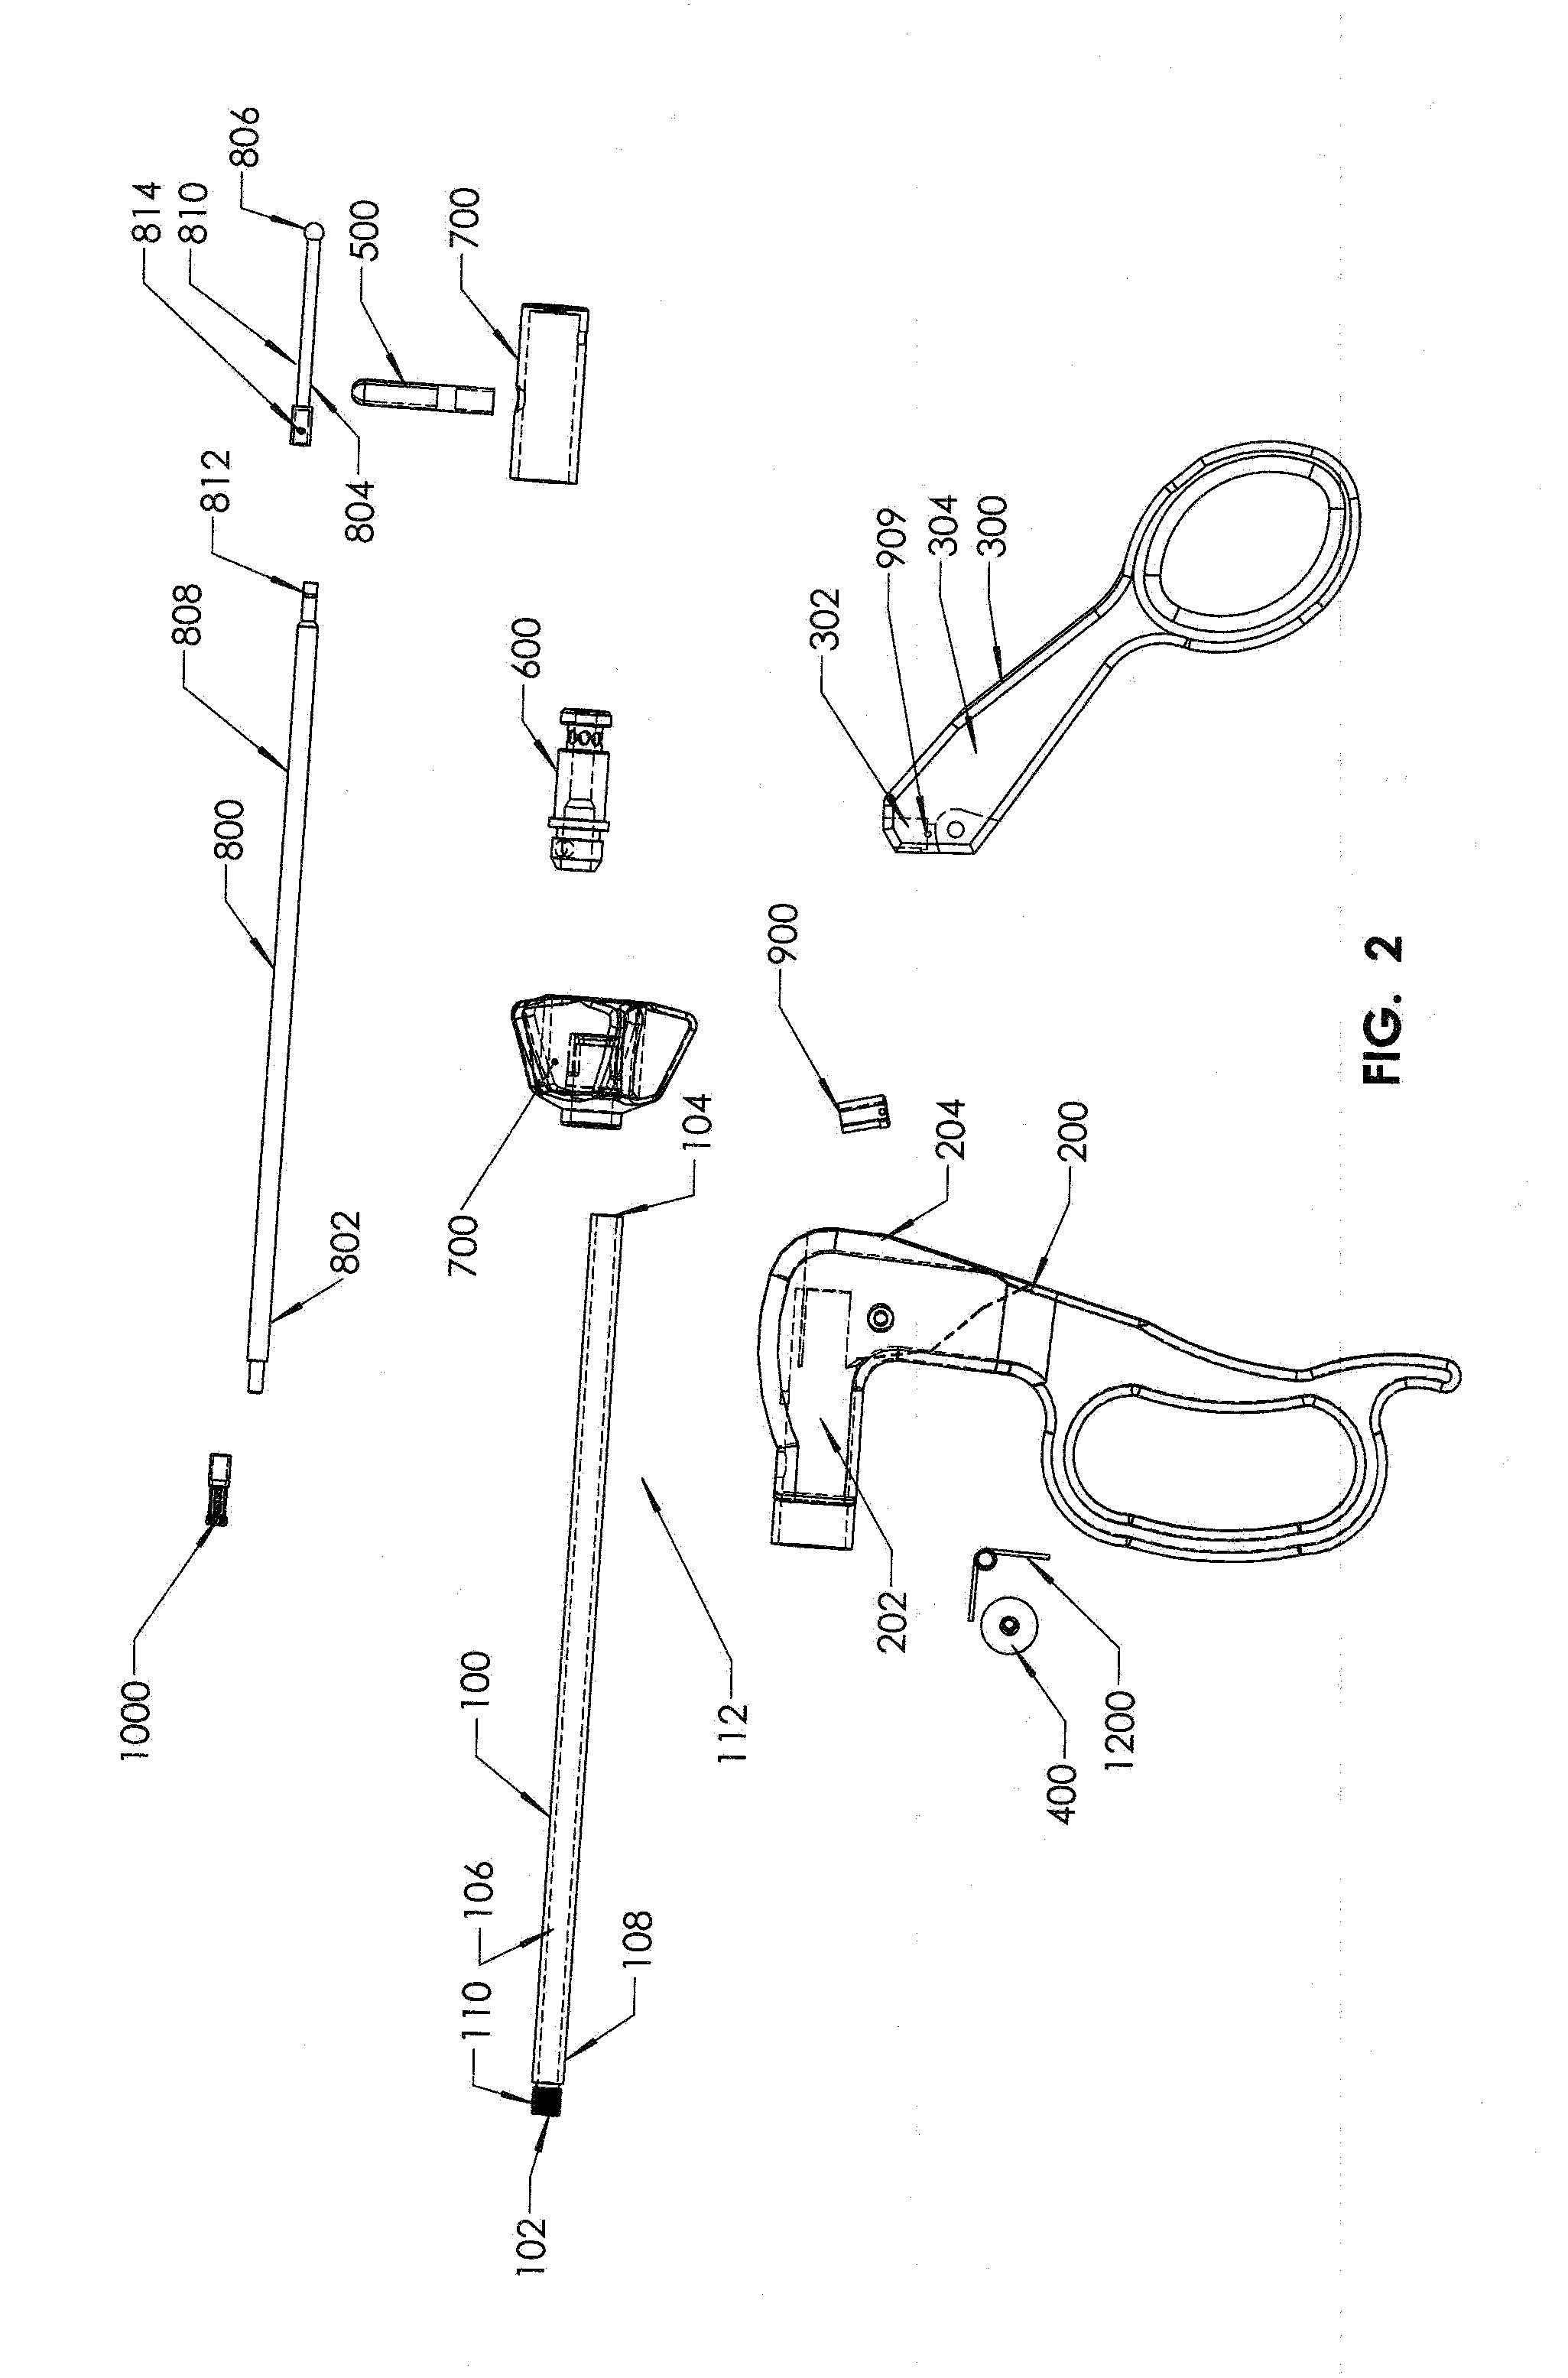 Surgical instrument with detachable tip